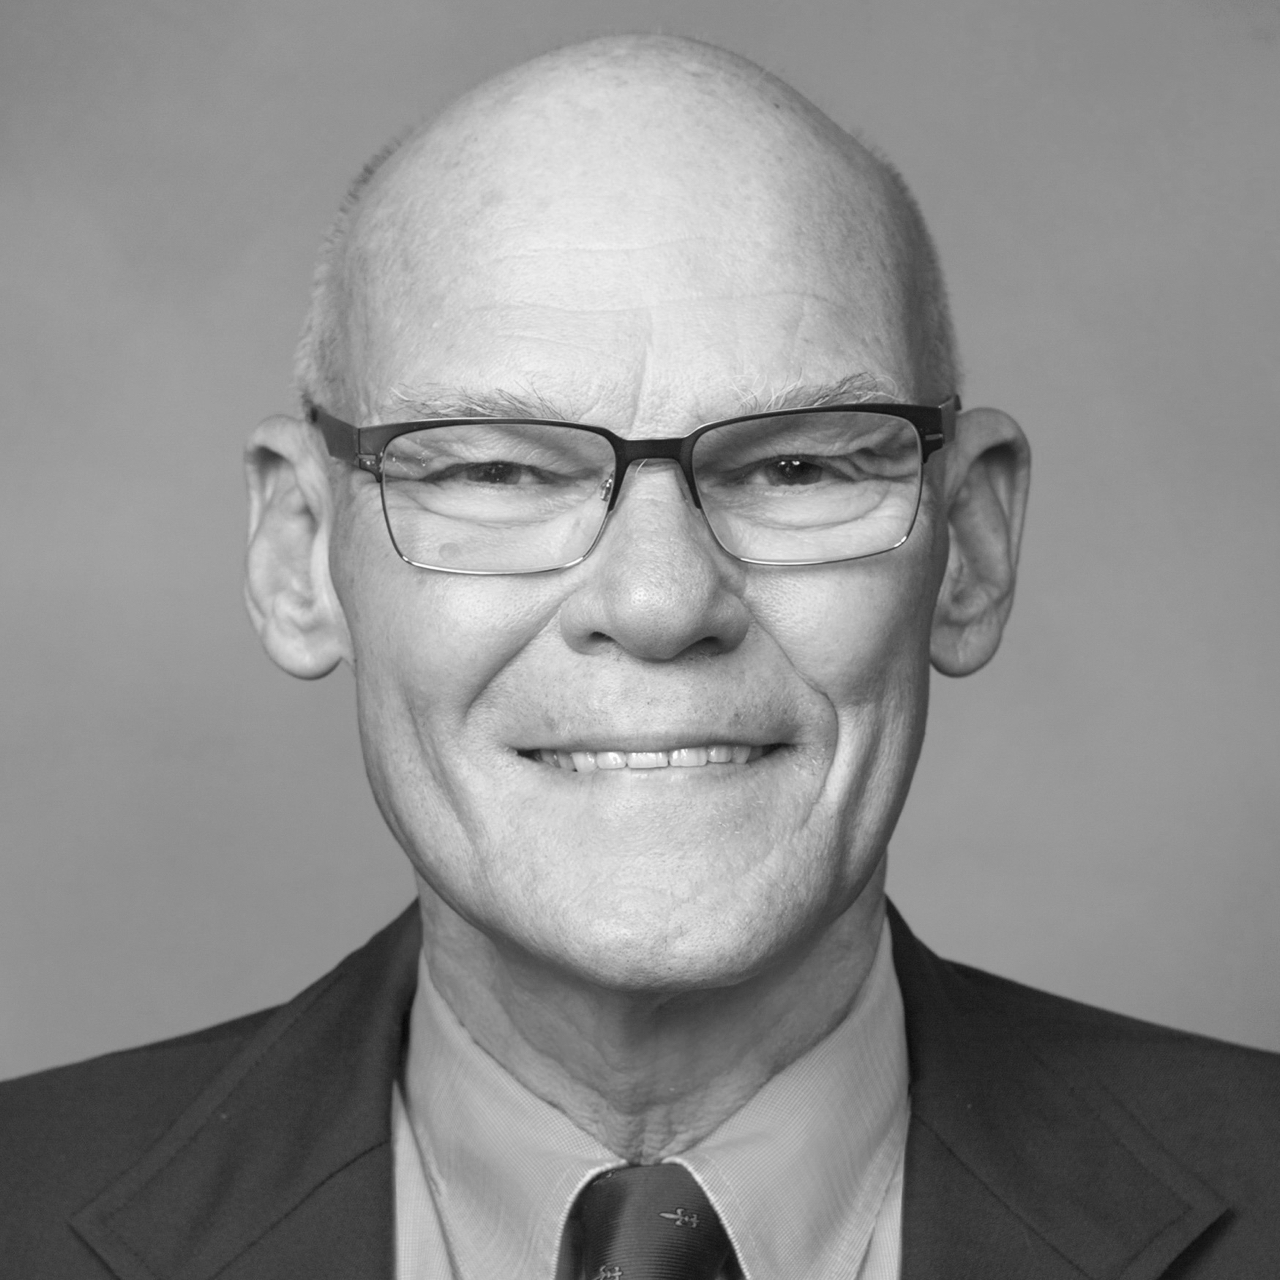 James Carville - Political Speaker At Politicon Los Angeles1280 x 1280